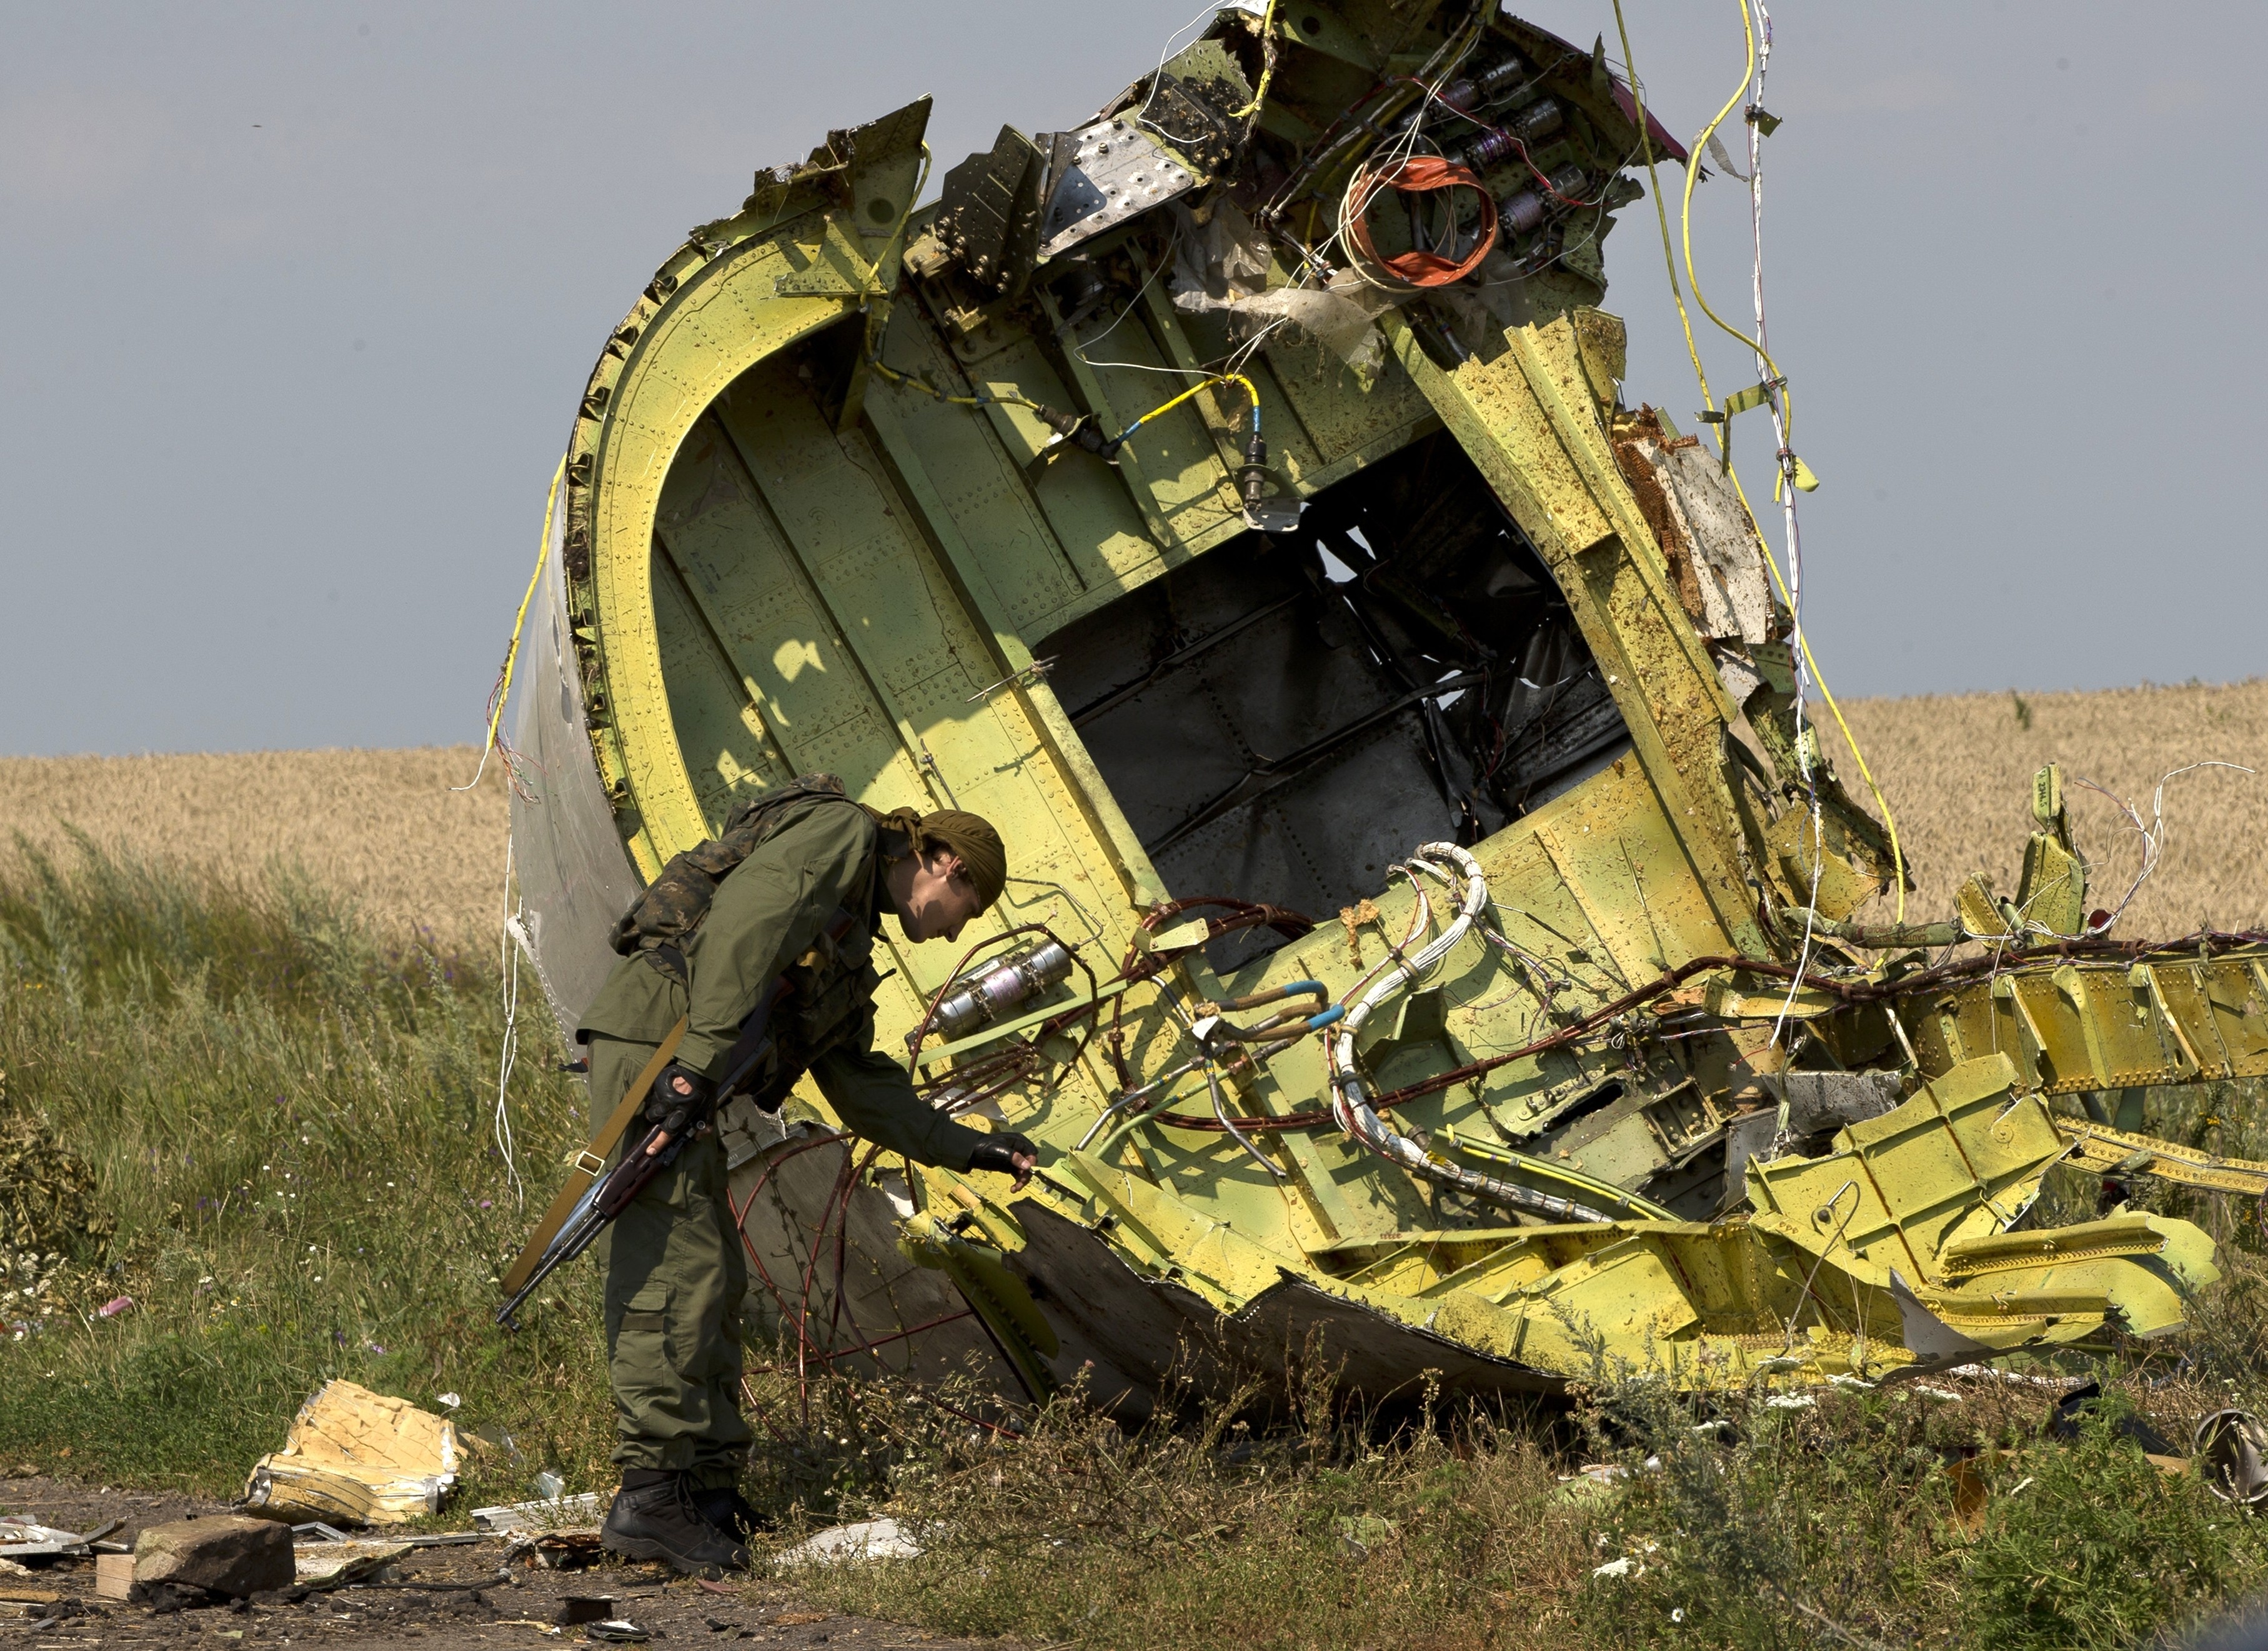 A pro-Russian rebel touches the MH17 wreckage at the crash site near the village of Hrabove, eastern Ukraine, in July 2014. Photo: AP